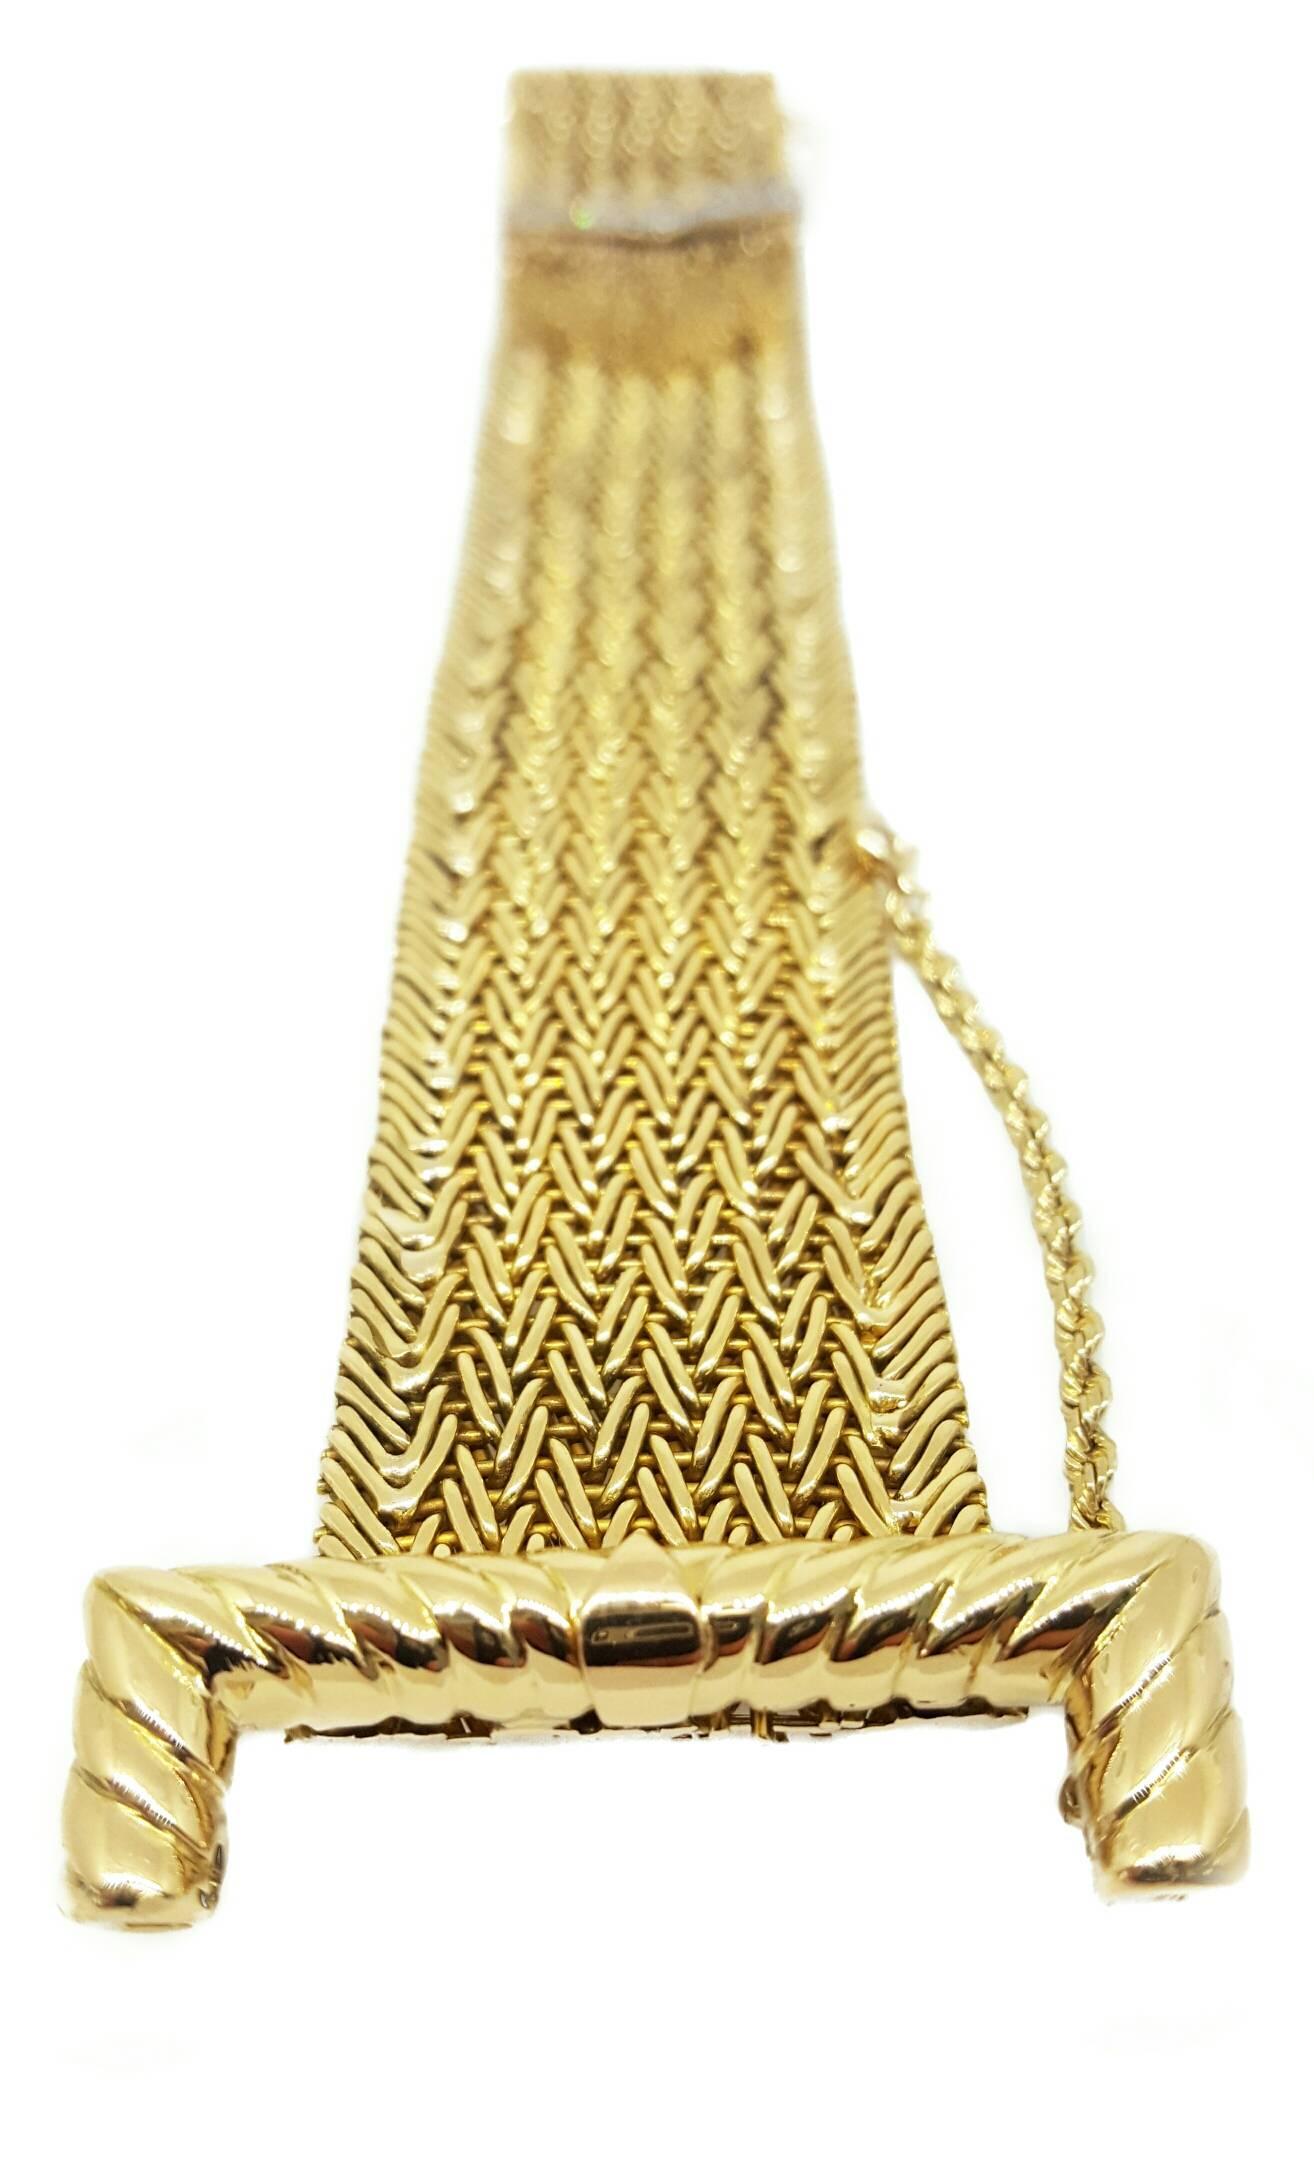 This very unique buckle bracelet was crafted in the 1950s using 18 karat yellow  and white gold. The heavy mesh design and golden tassels give this piece a one-of-a-kind look. The nine round single cut diamonds are set into white gold and have a